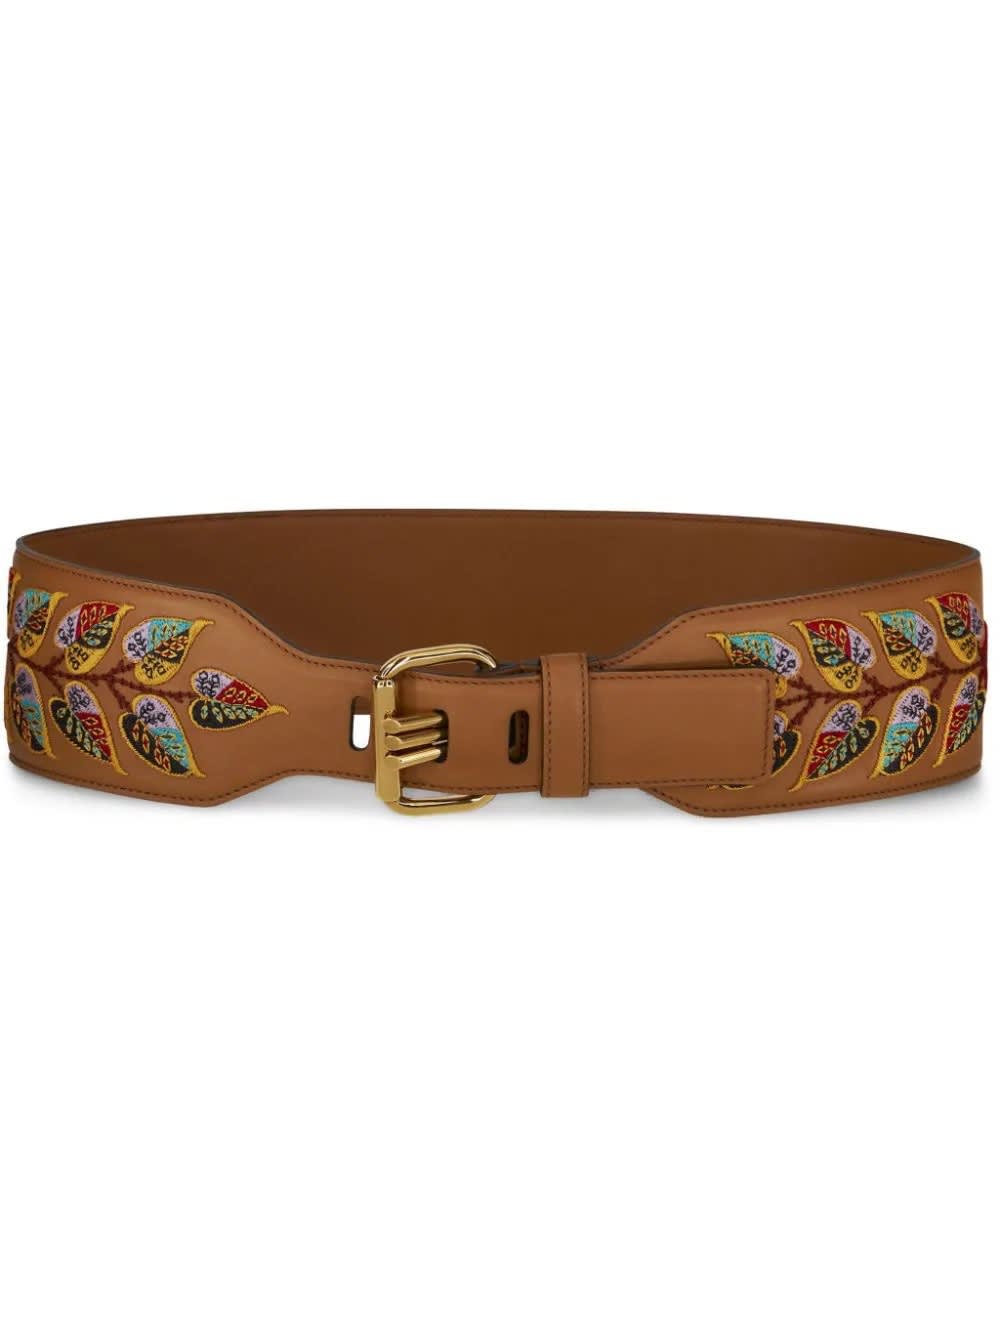 Etro Embroidered Brown Leather Belt